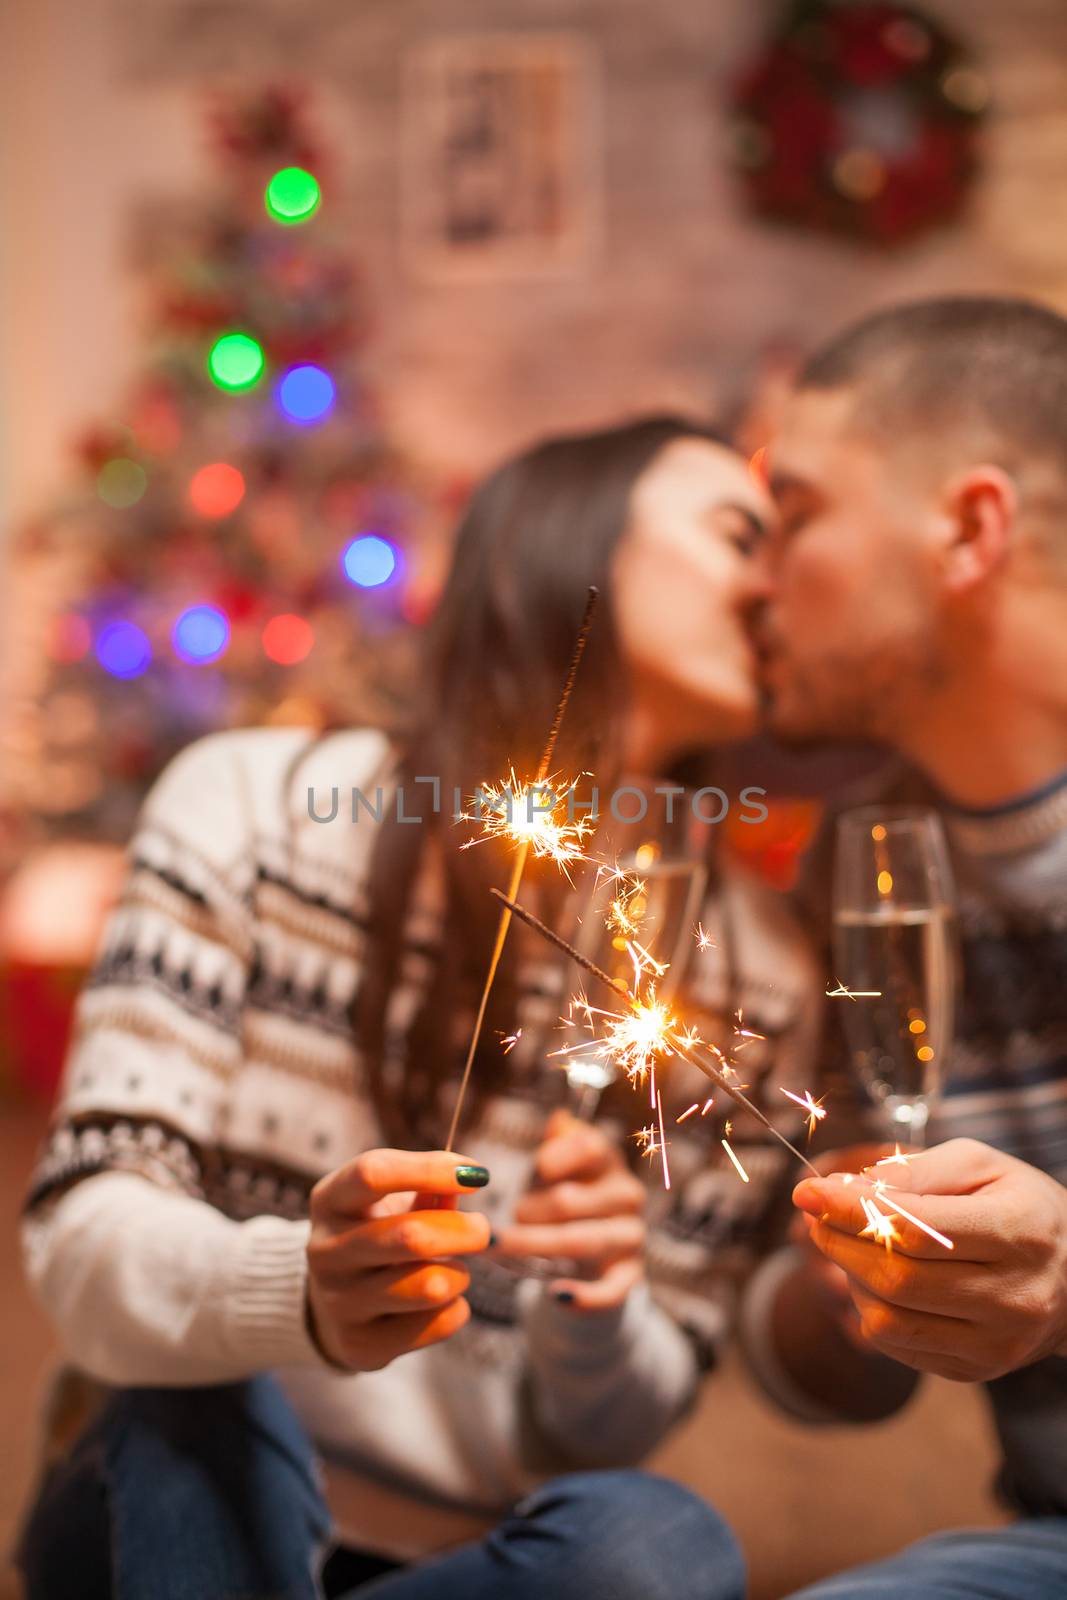 Hand fireworks flicker brightly holded by couple on christmas.